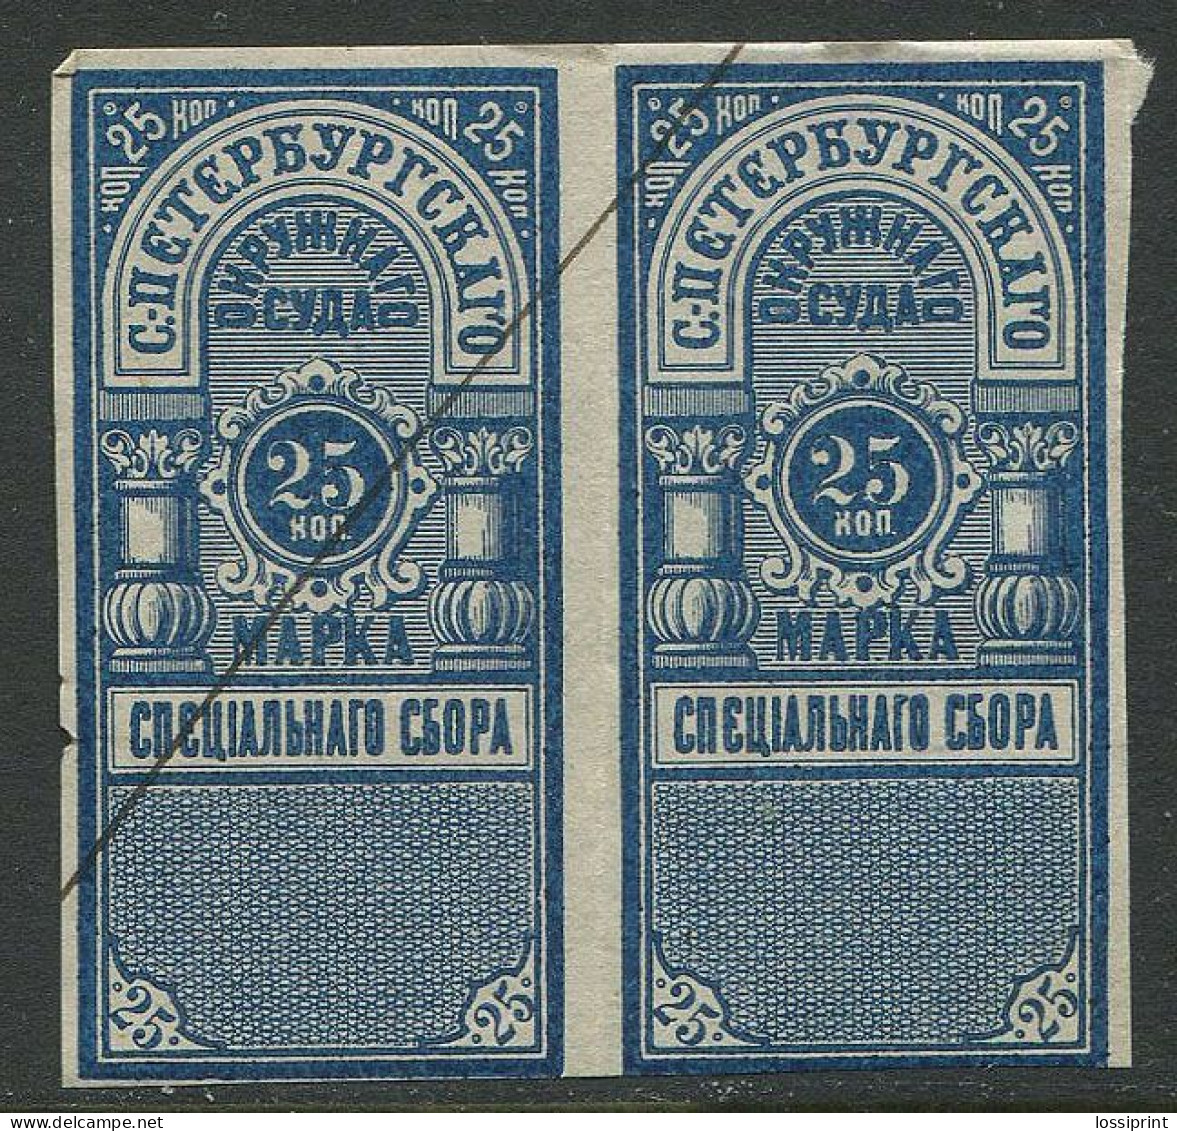 Russia:Used Revenue Stamps 25 Kopeika, Pair, Pre 1917 - Fiscali